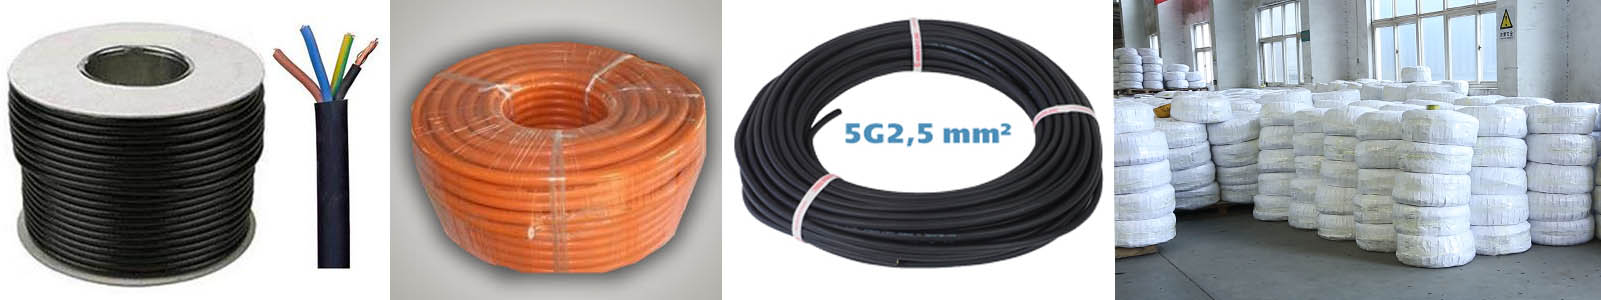 rubber cable package